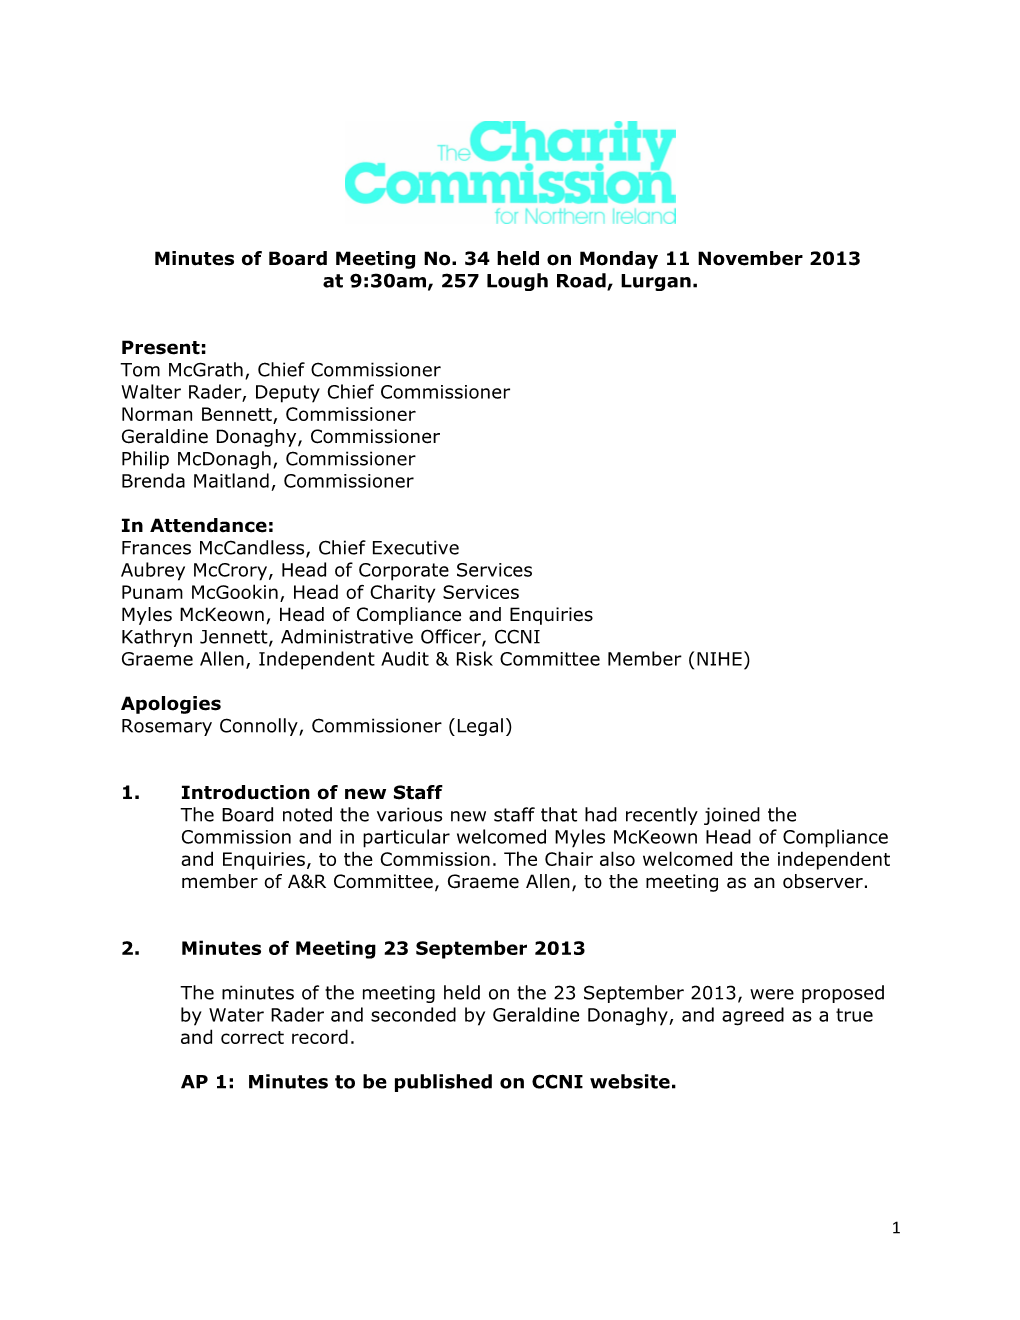 Minutes of Board Meeting No. 34 Held on Monday 11 November 2013